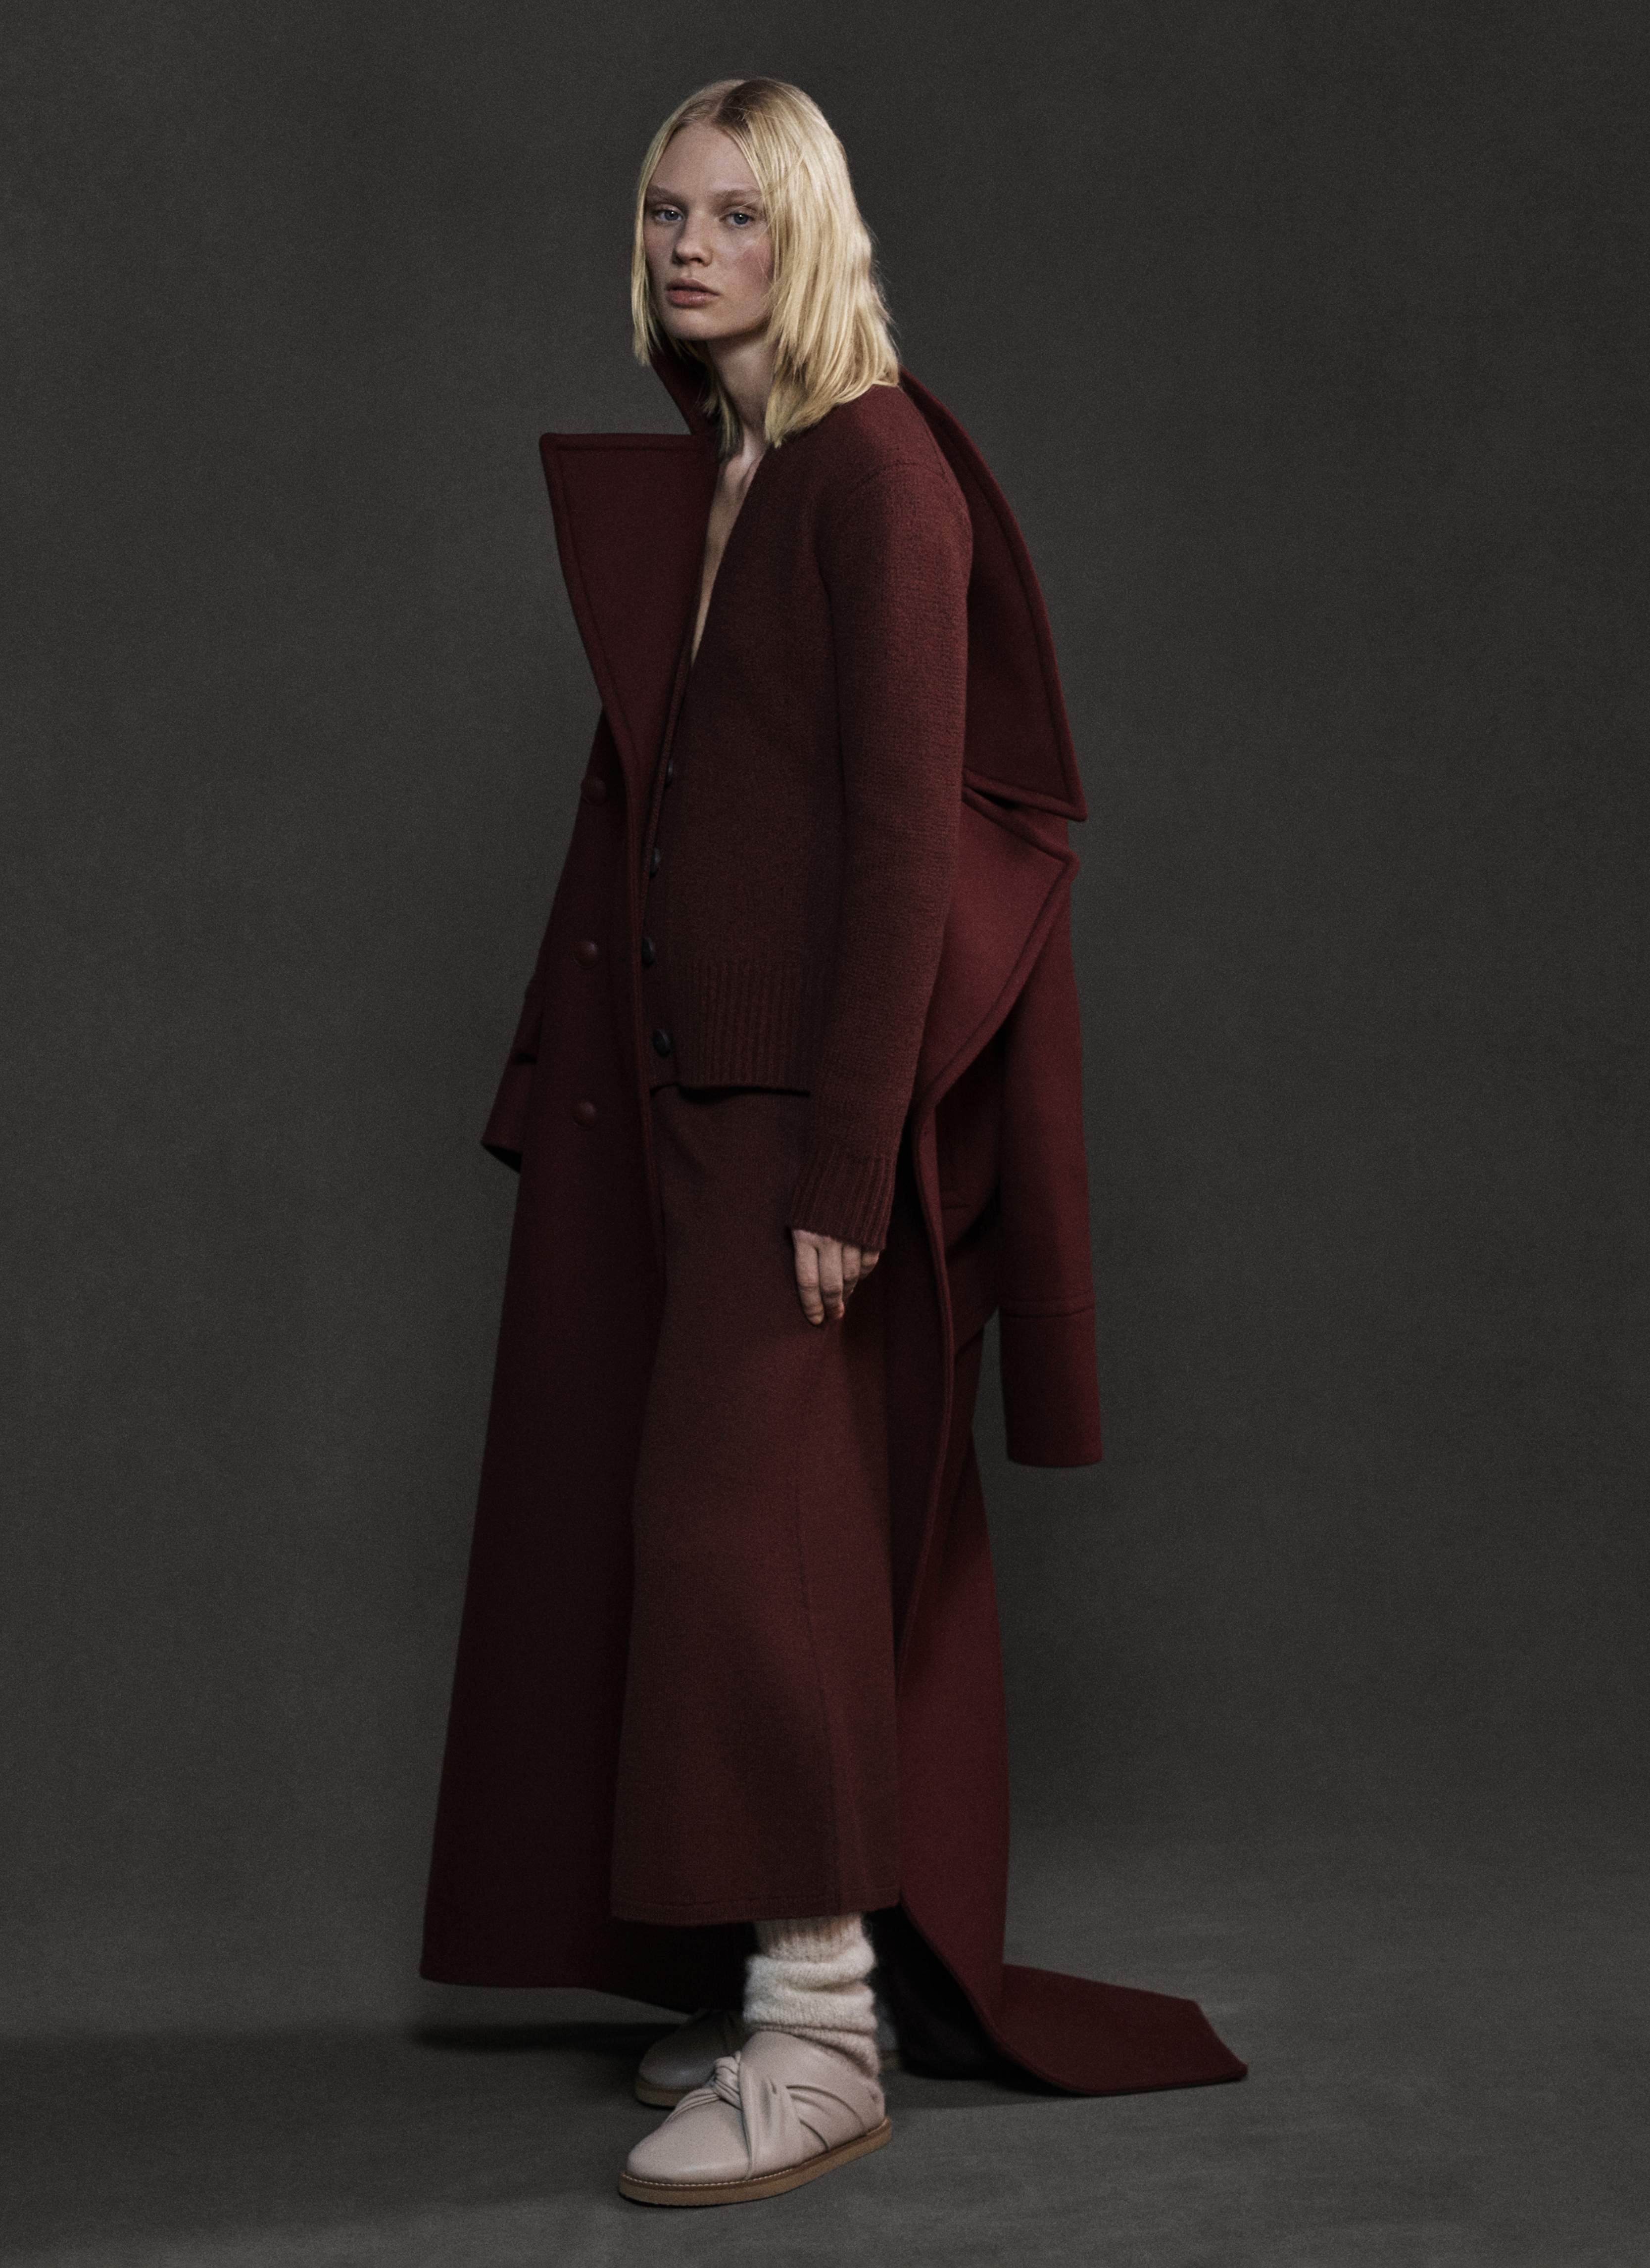 AW22: THE WINTER COLLECTION EDIT 3